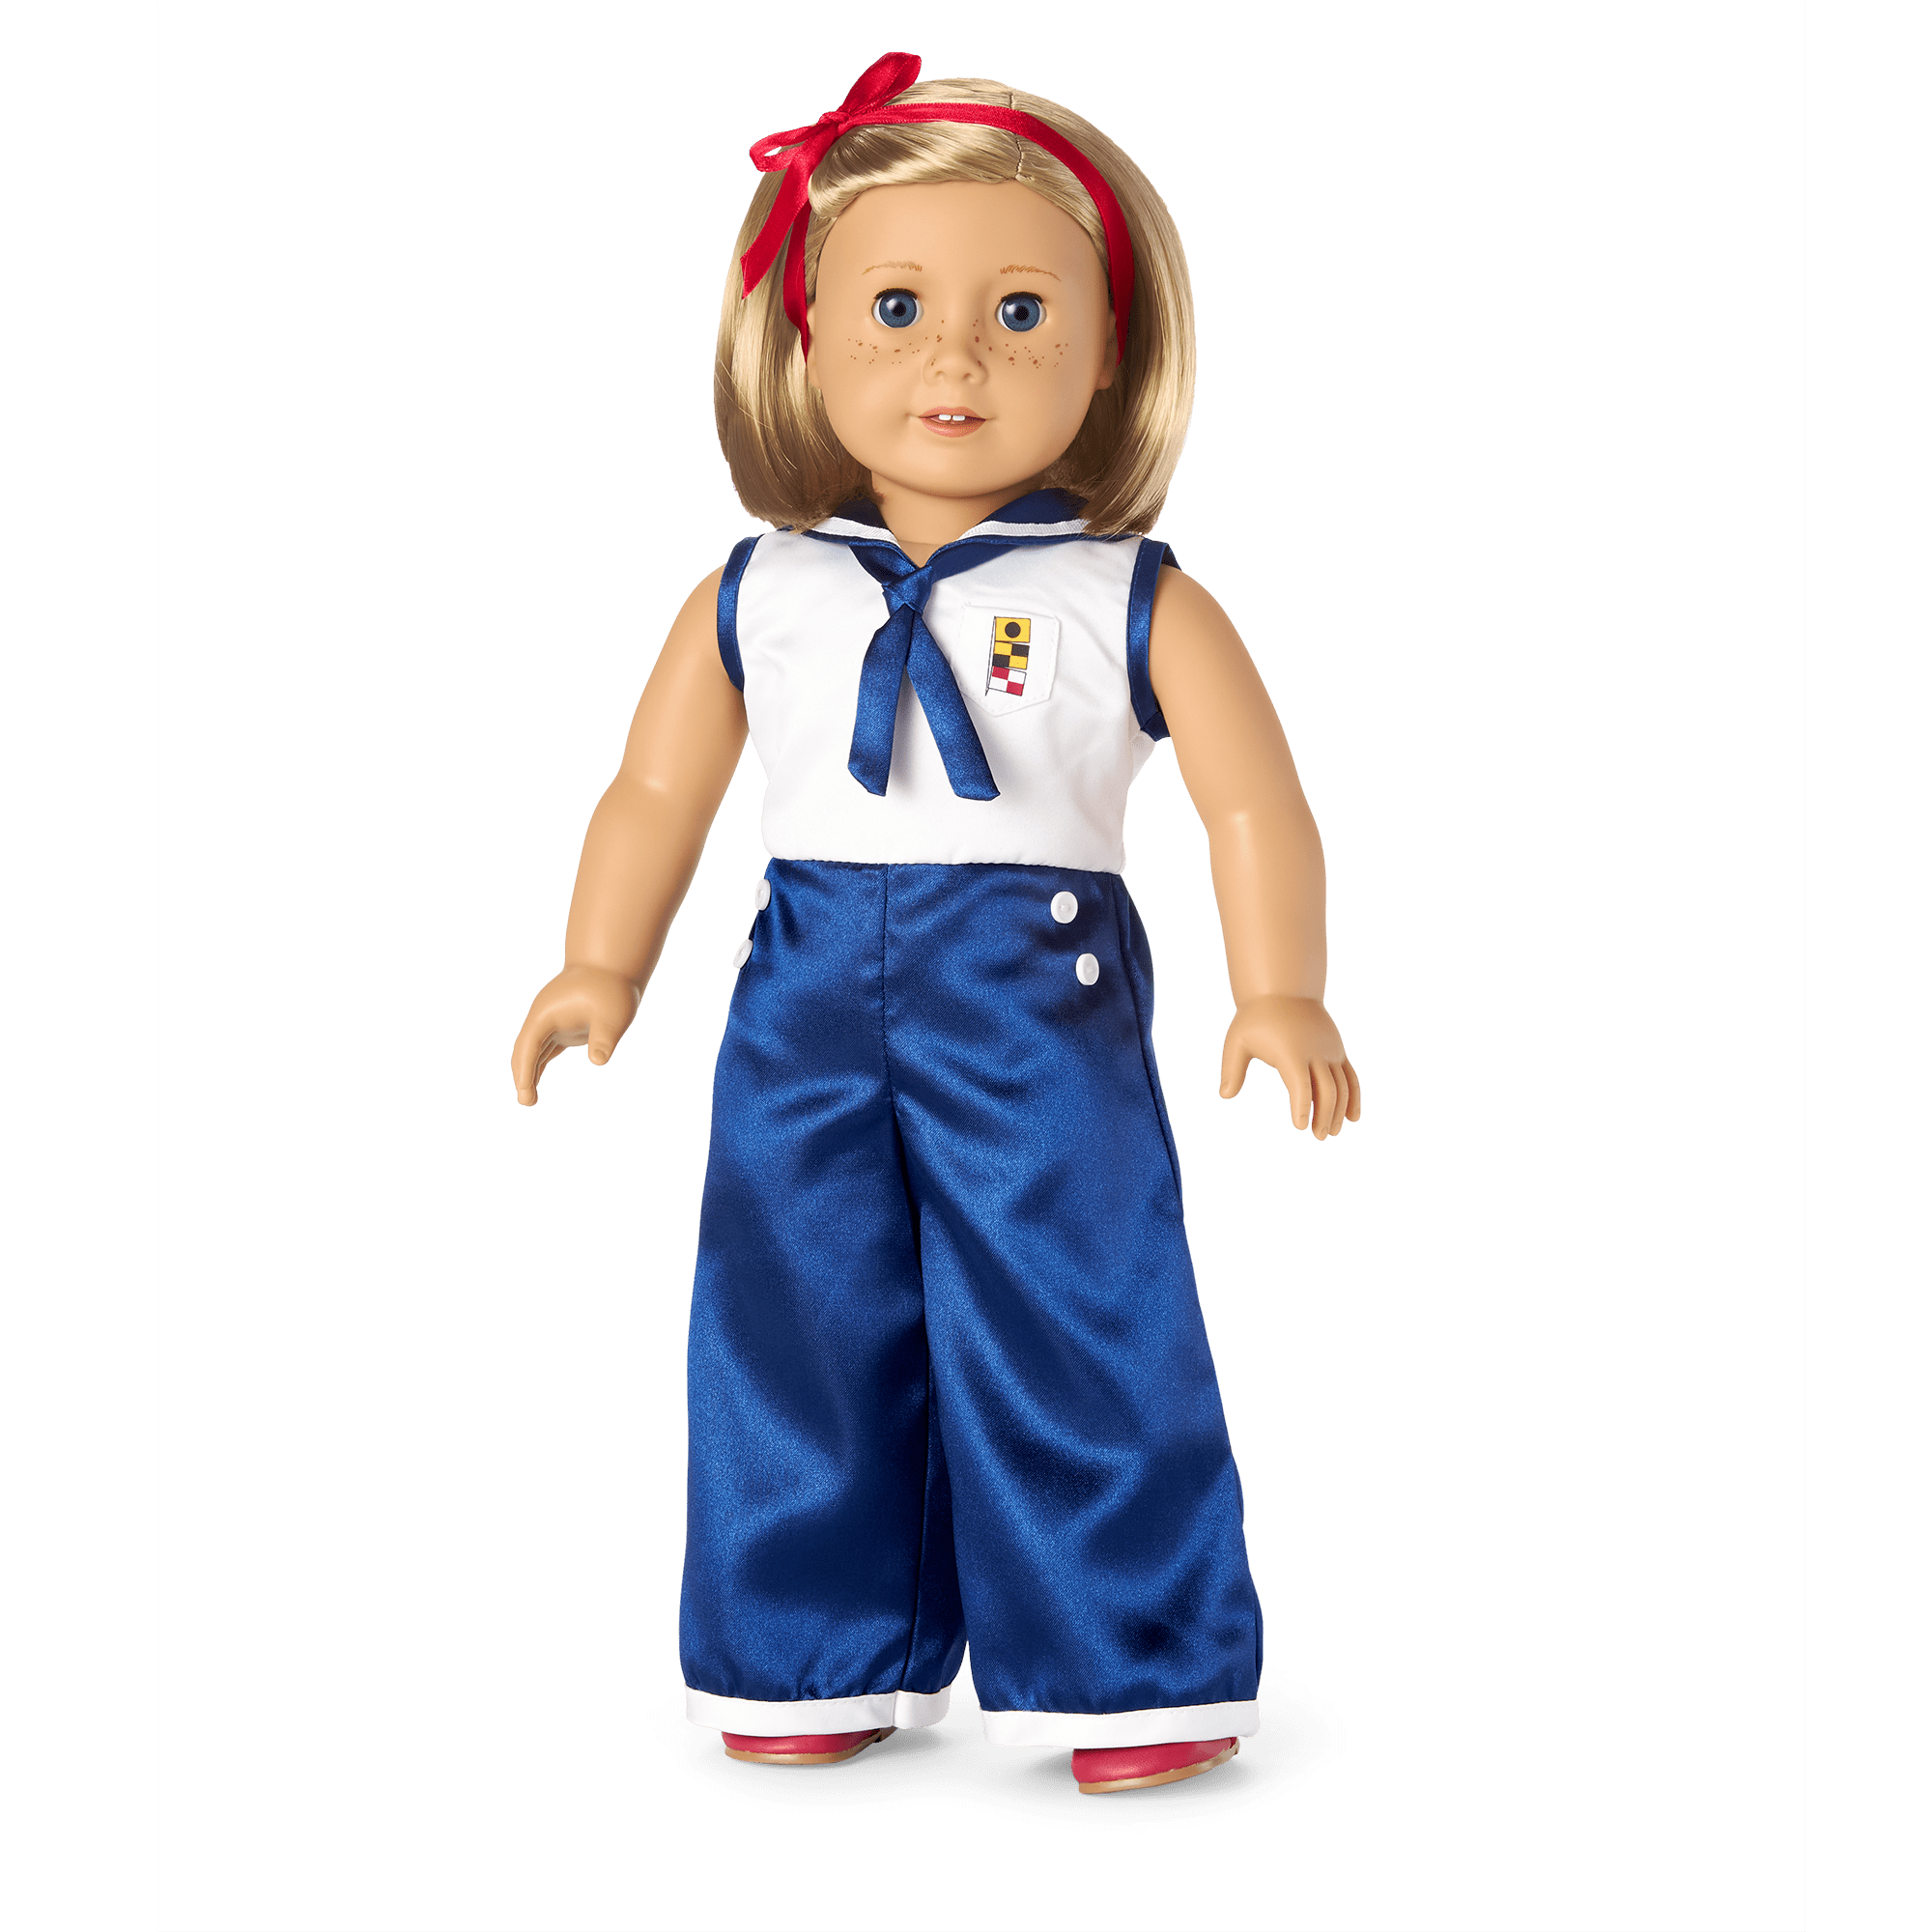 American 18 Inch Girl Doll Clothes and Accessories School Supplies Playset  with Doll Clothes,School Bags, Sunglasses, Pencils, Pencil Sharpener